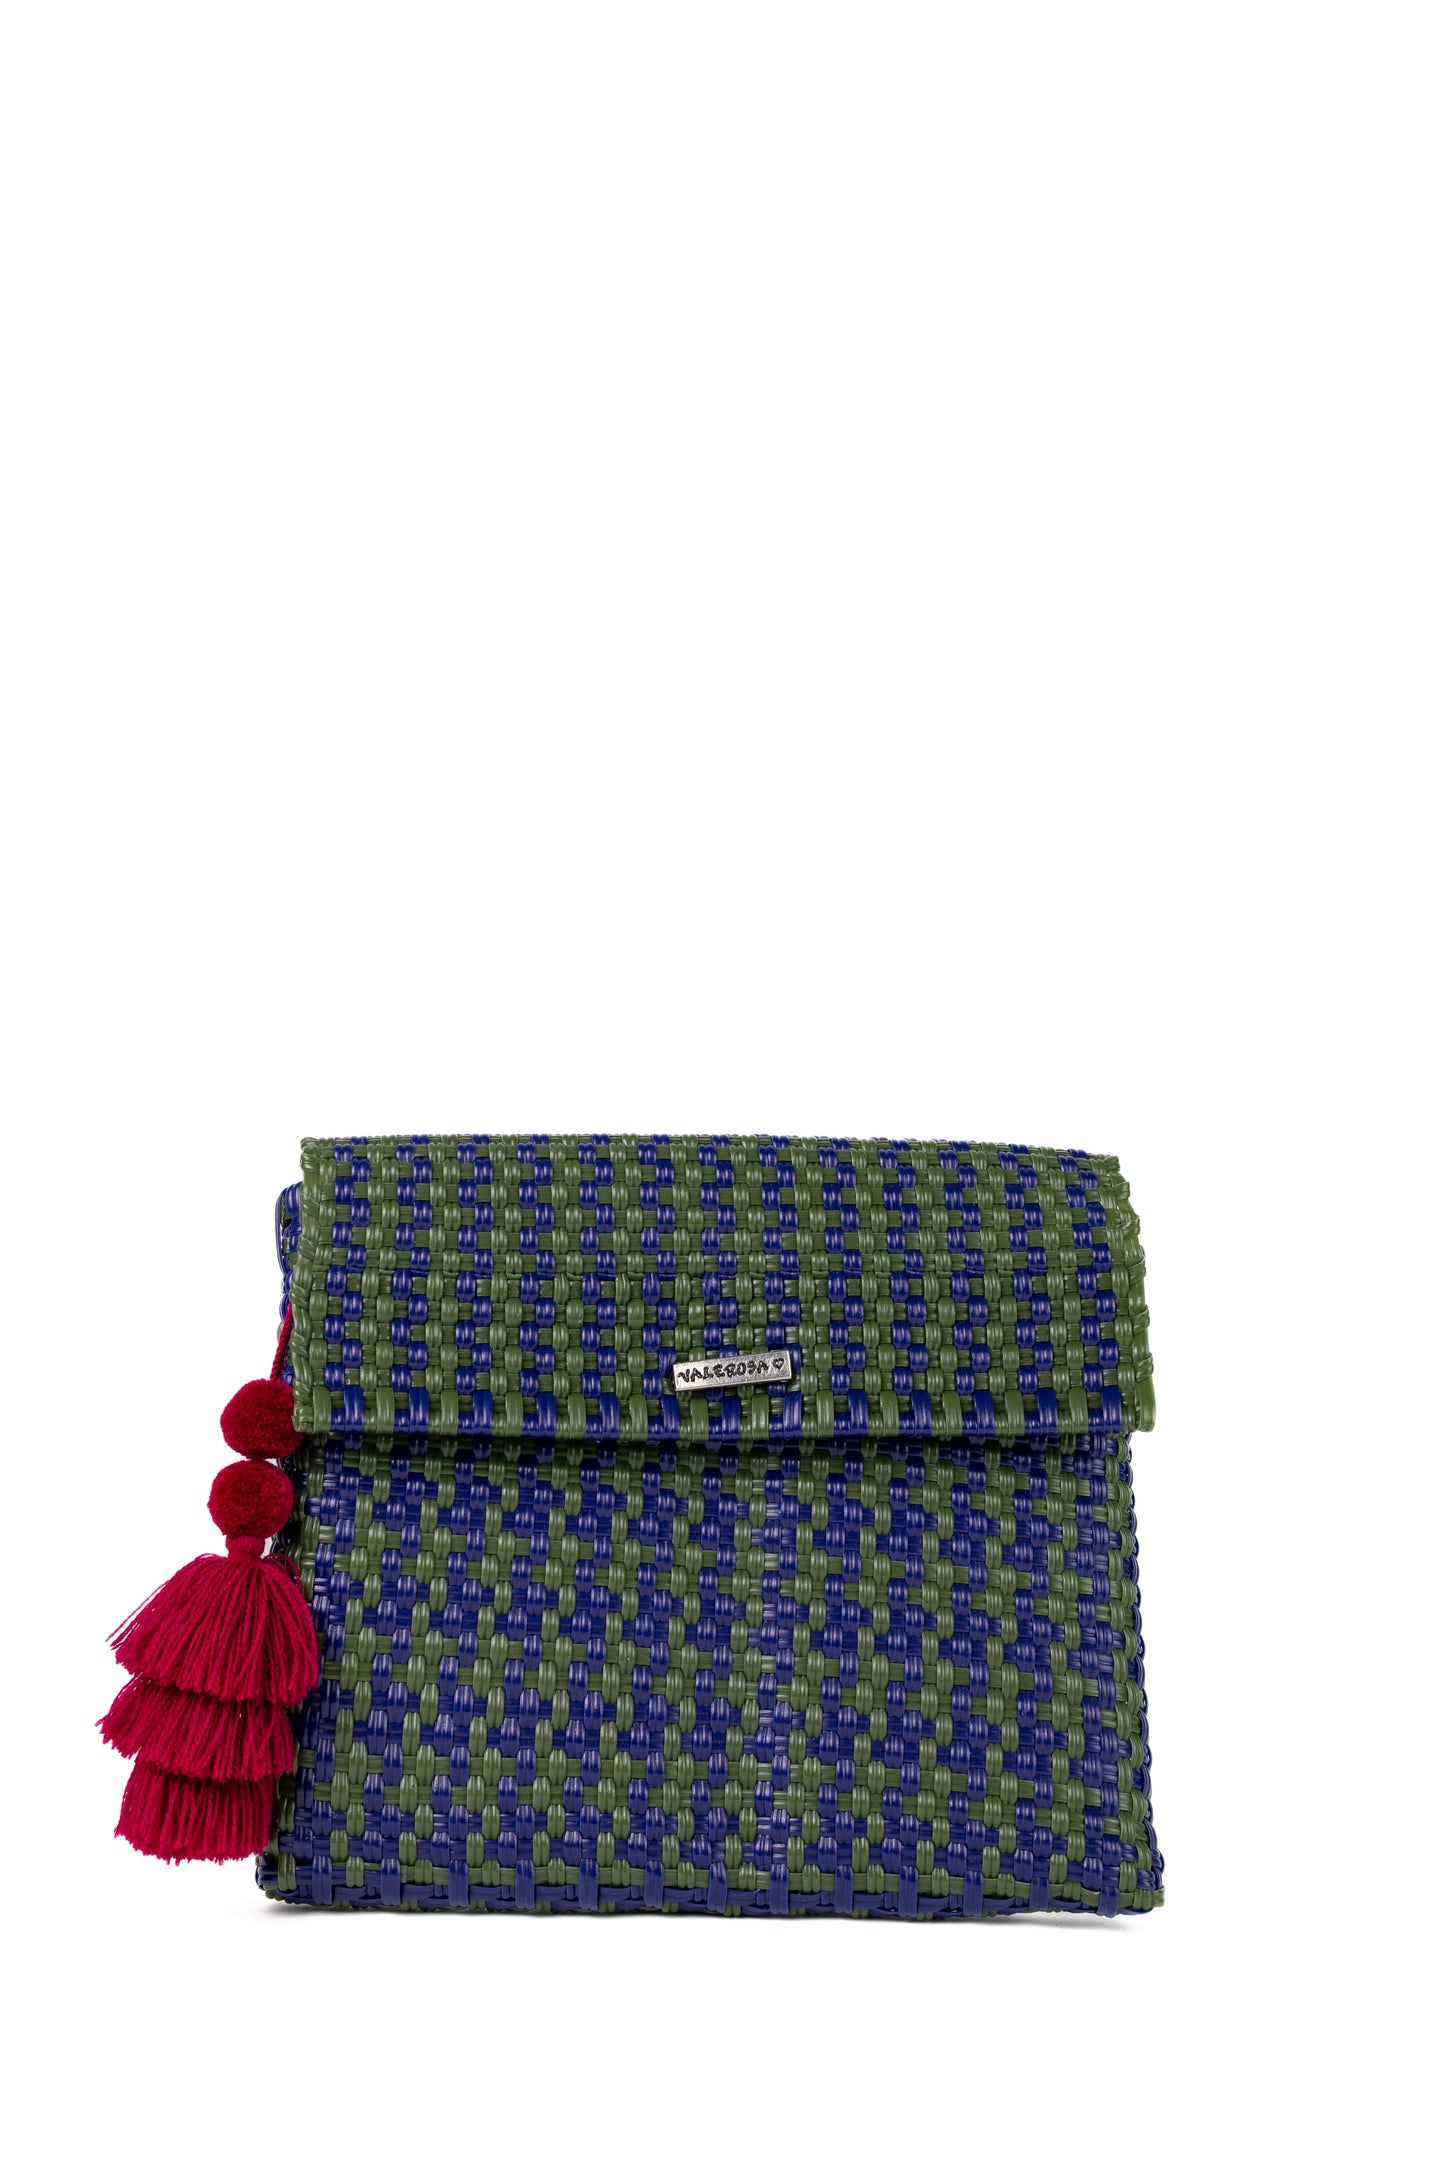 Olive and Navy Houndstooth Clutch